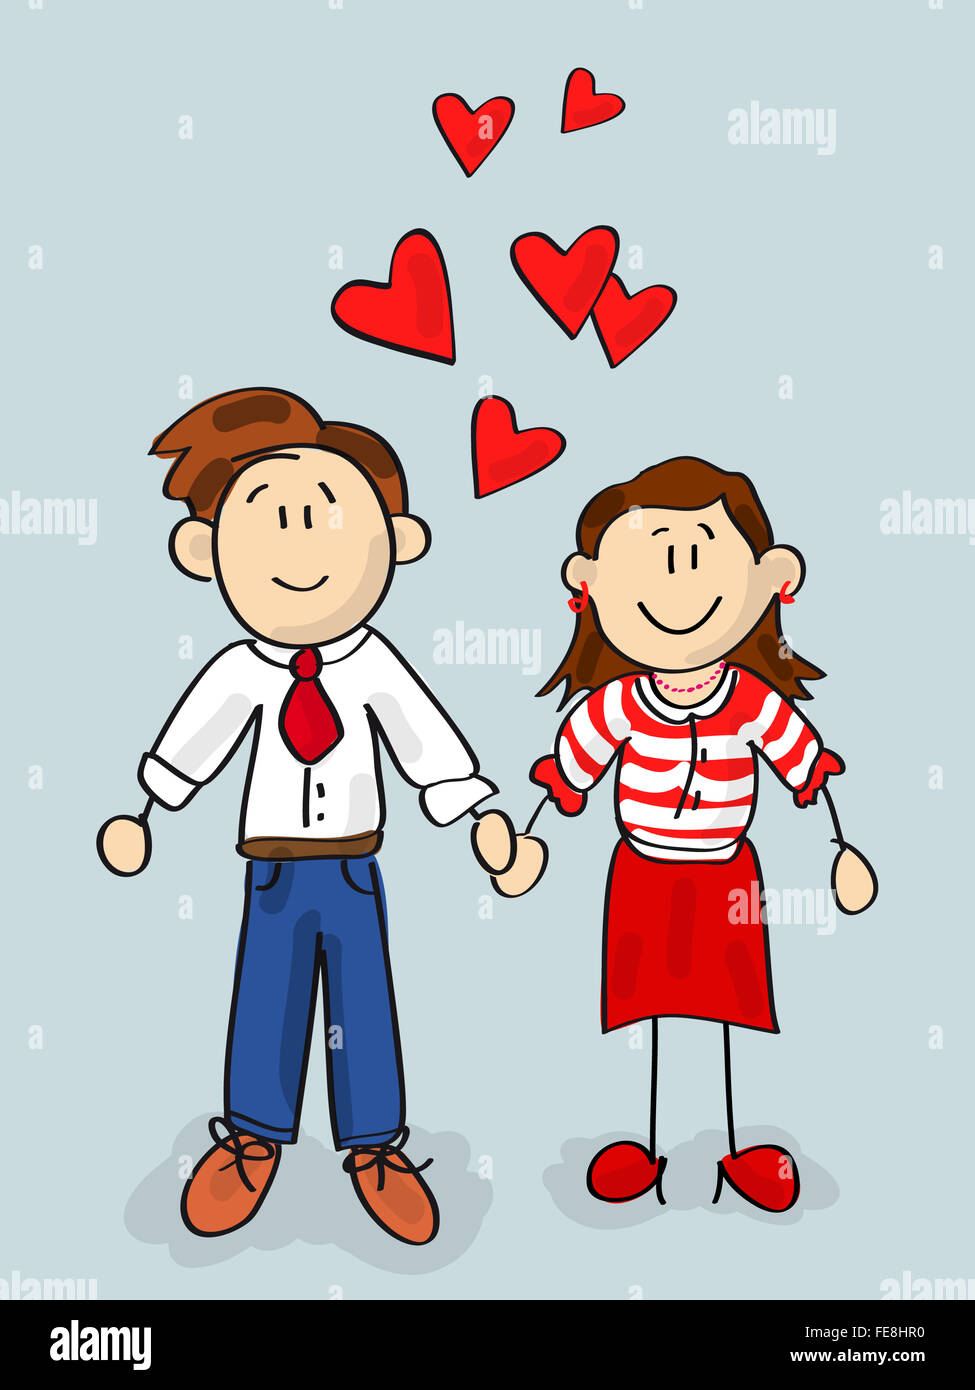 Happy couple cartoon Valentine card with little hearts Stock Photo - Alamy